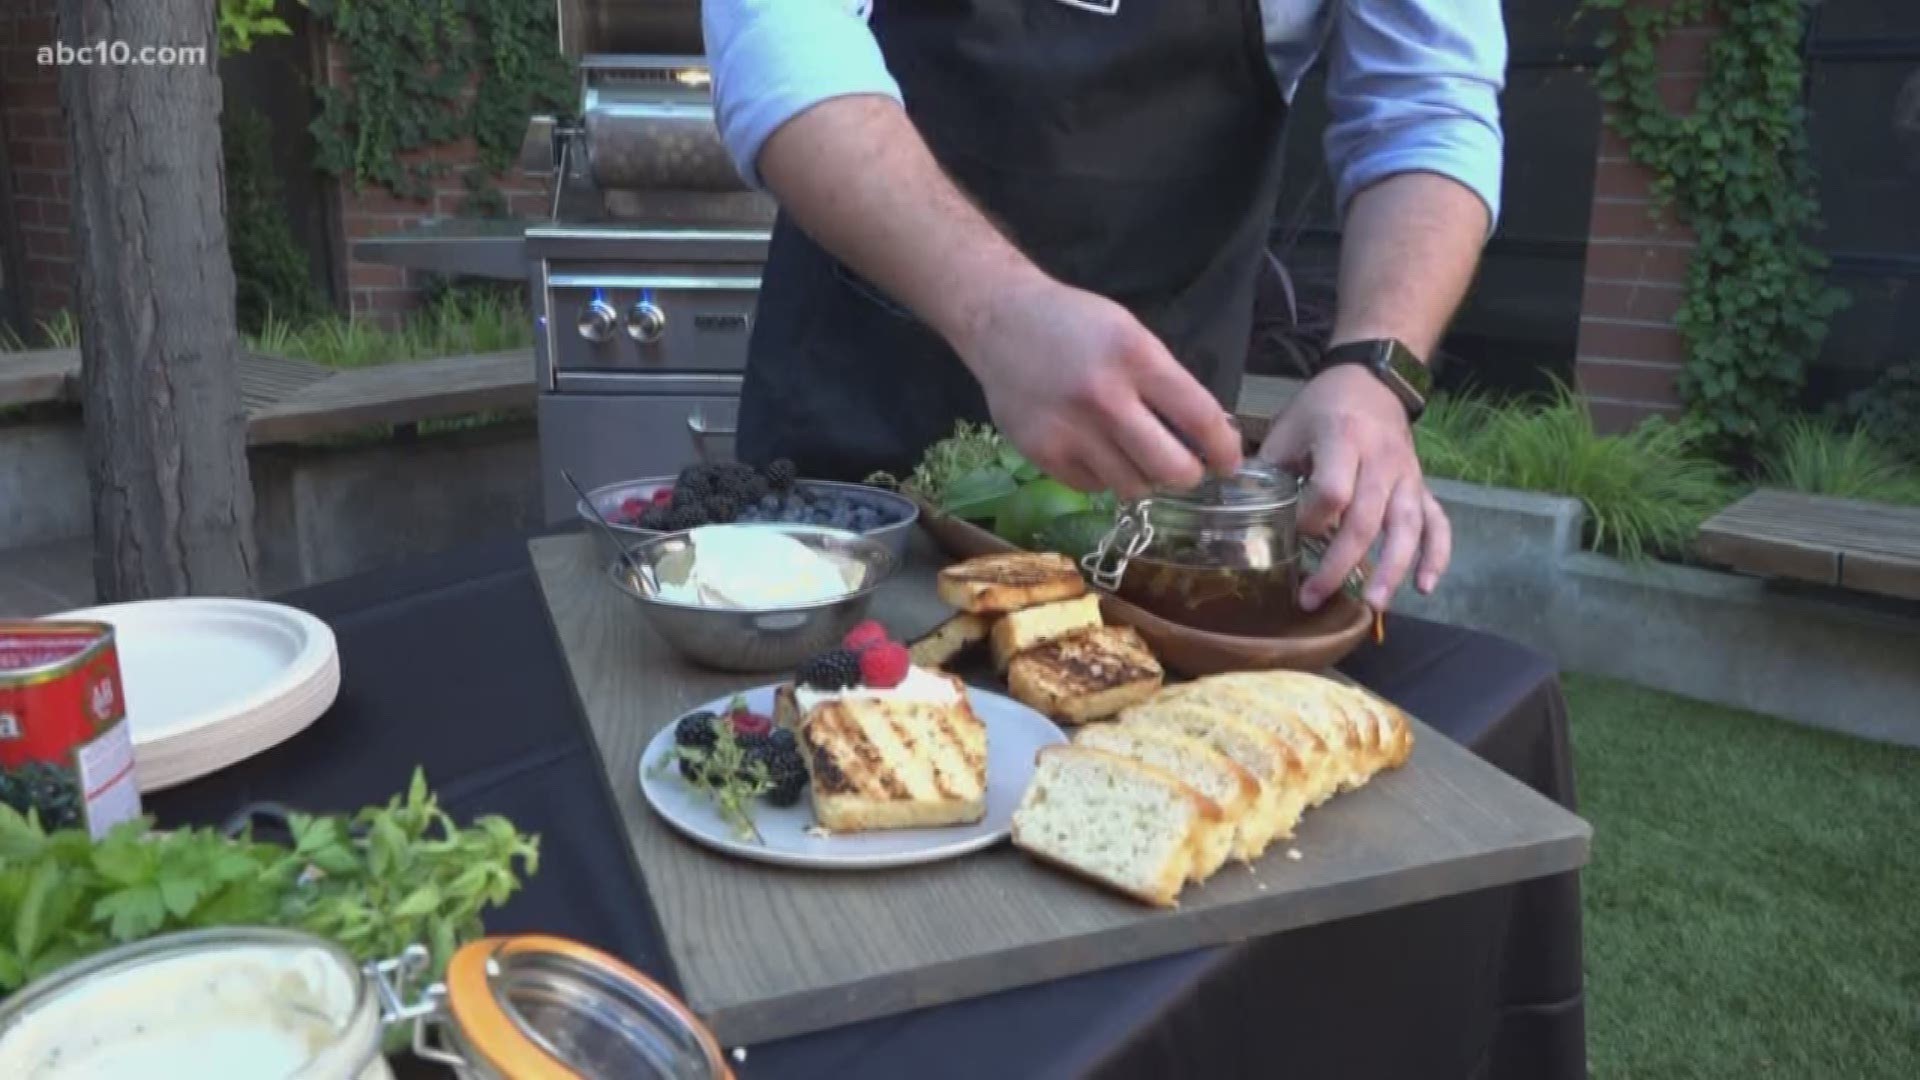 Andres Dangond, executive chef of Lynx Grills, shows us some summer grilling tips and recipes you can try at home.